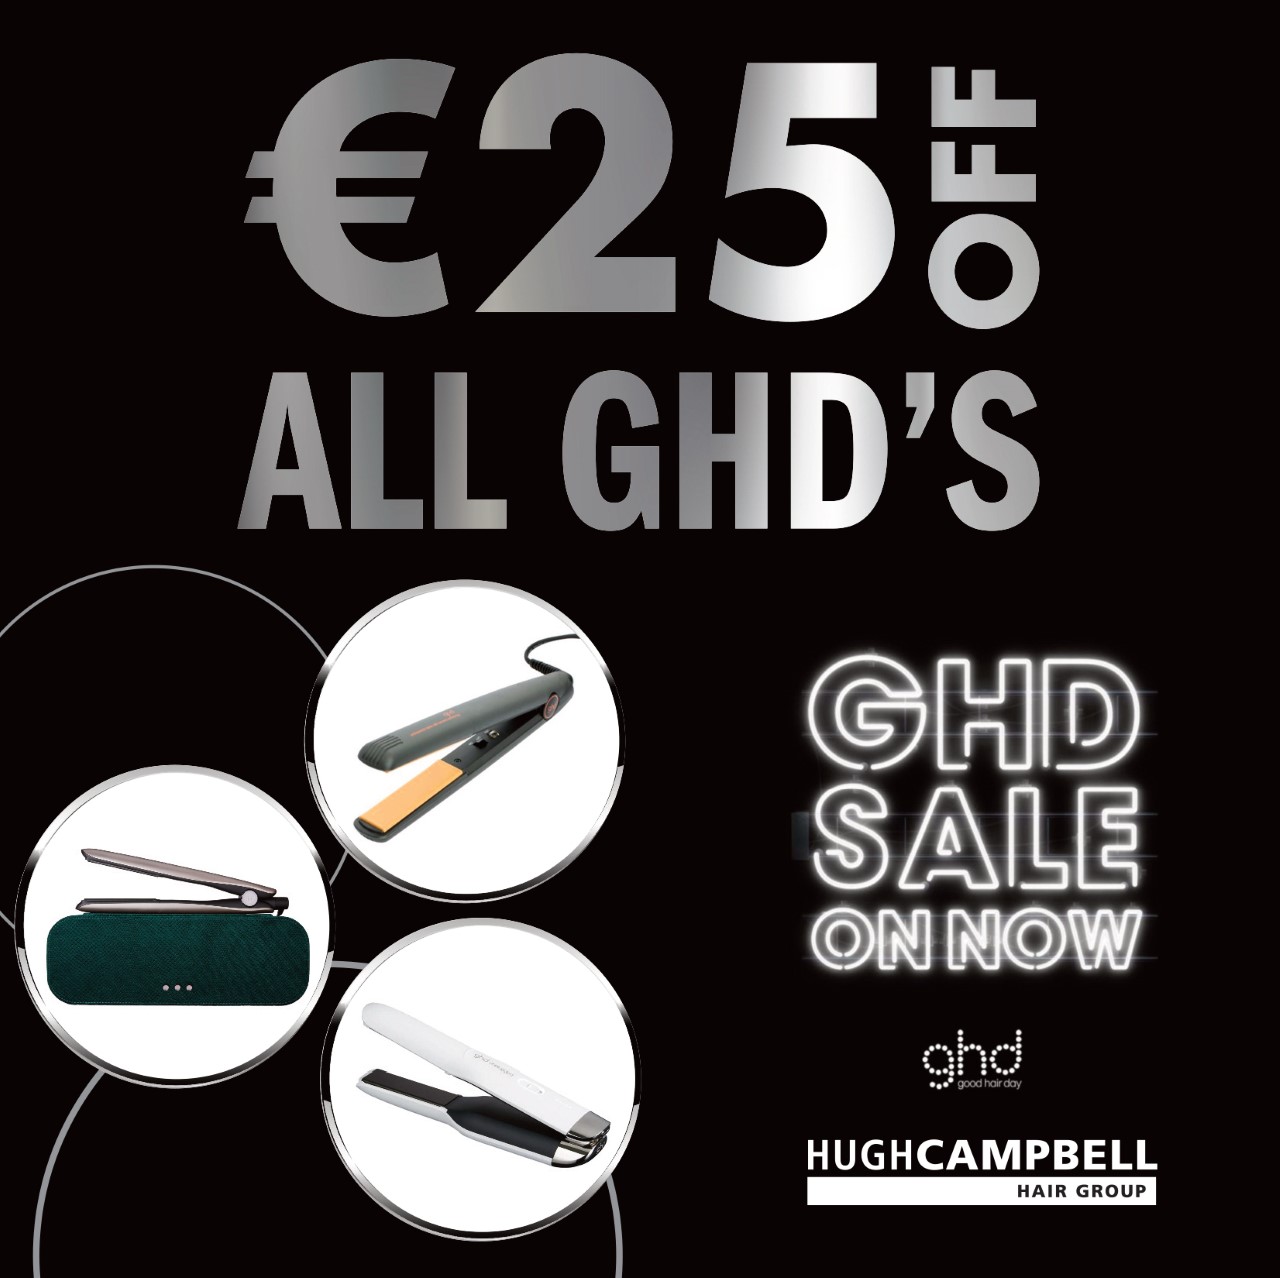 January Ghd Sale Online and Instore at Hugh Campbell Hair Group